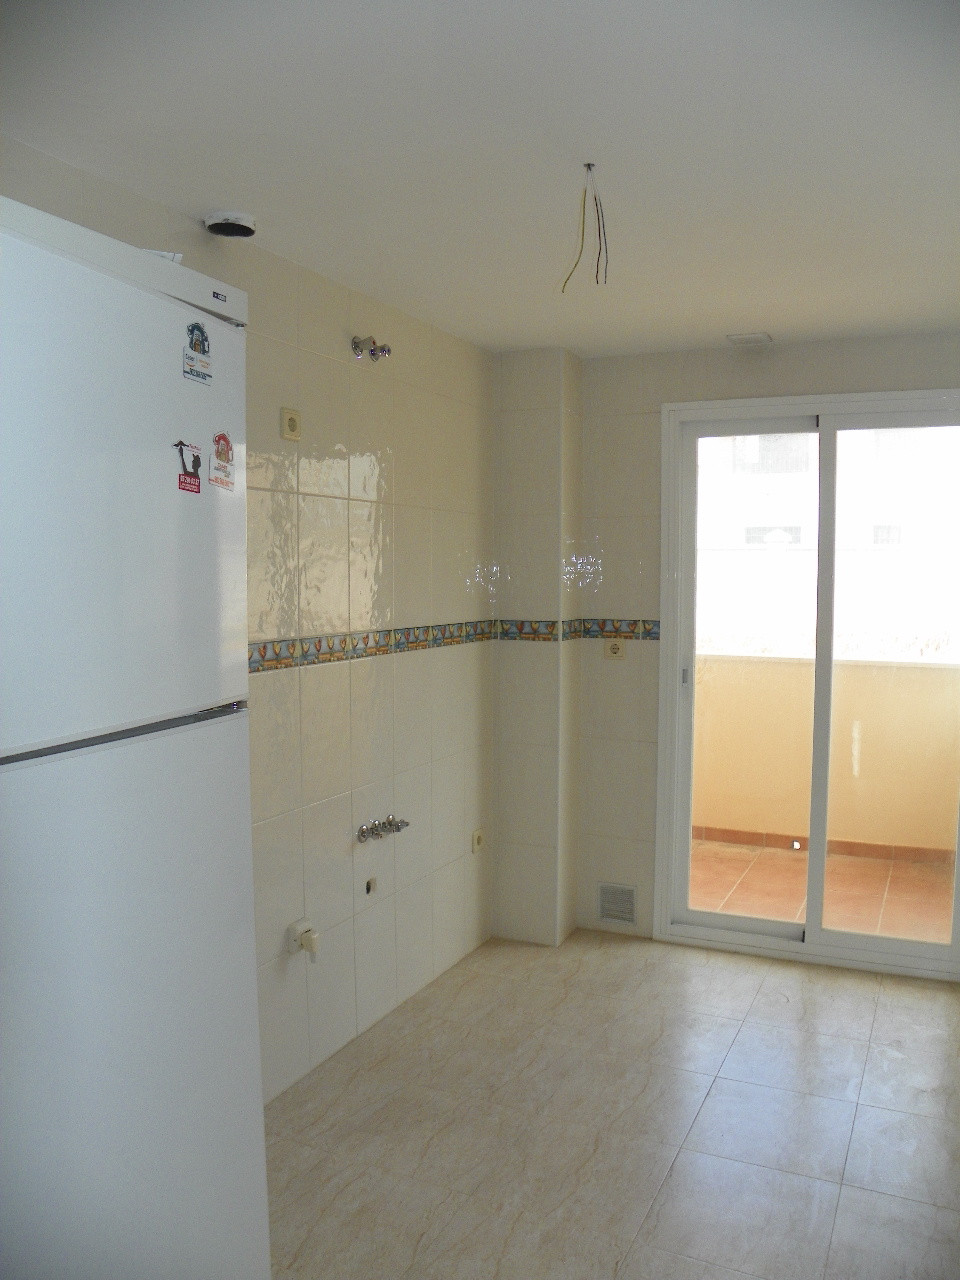 Excellent opportunity to acquire a wonderful top floor apartment close to the center of the village of Alhaurin El Grande.